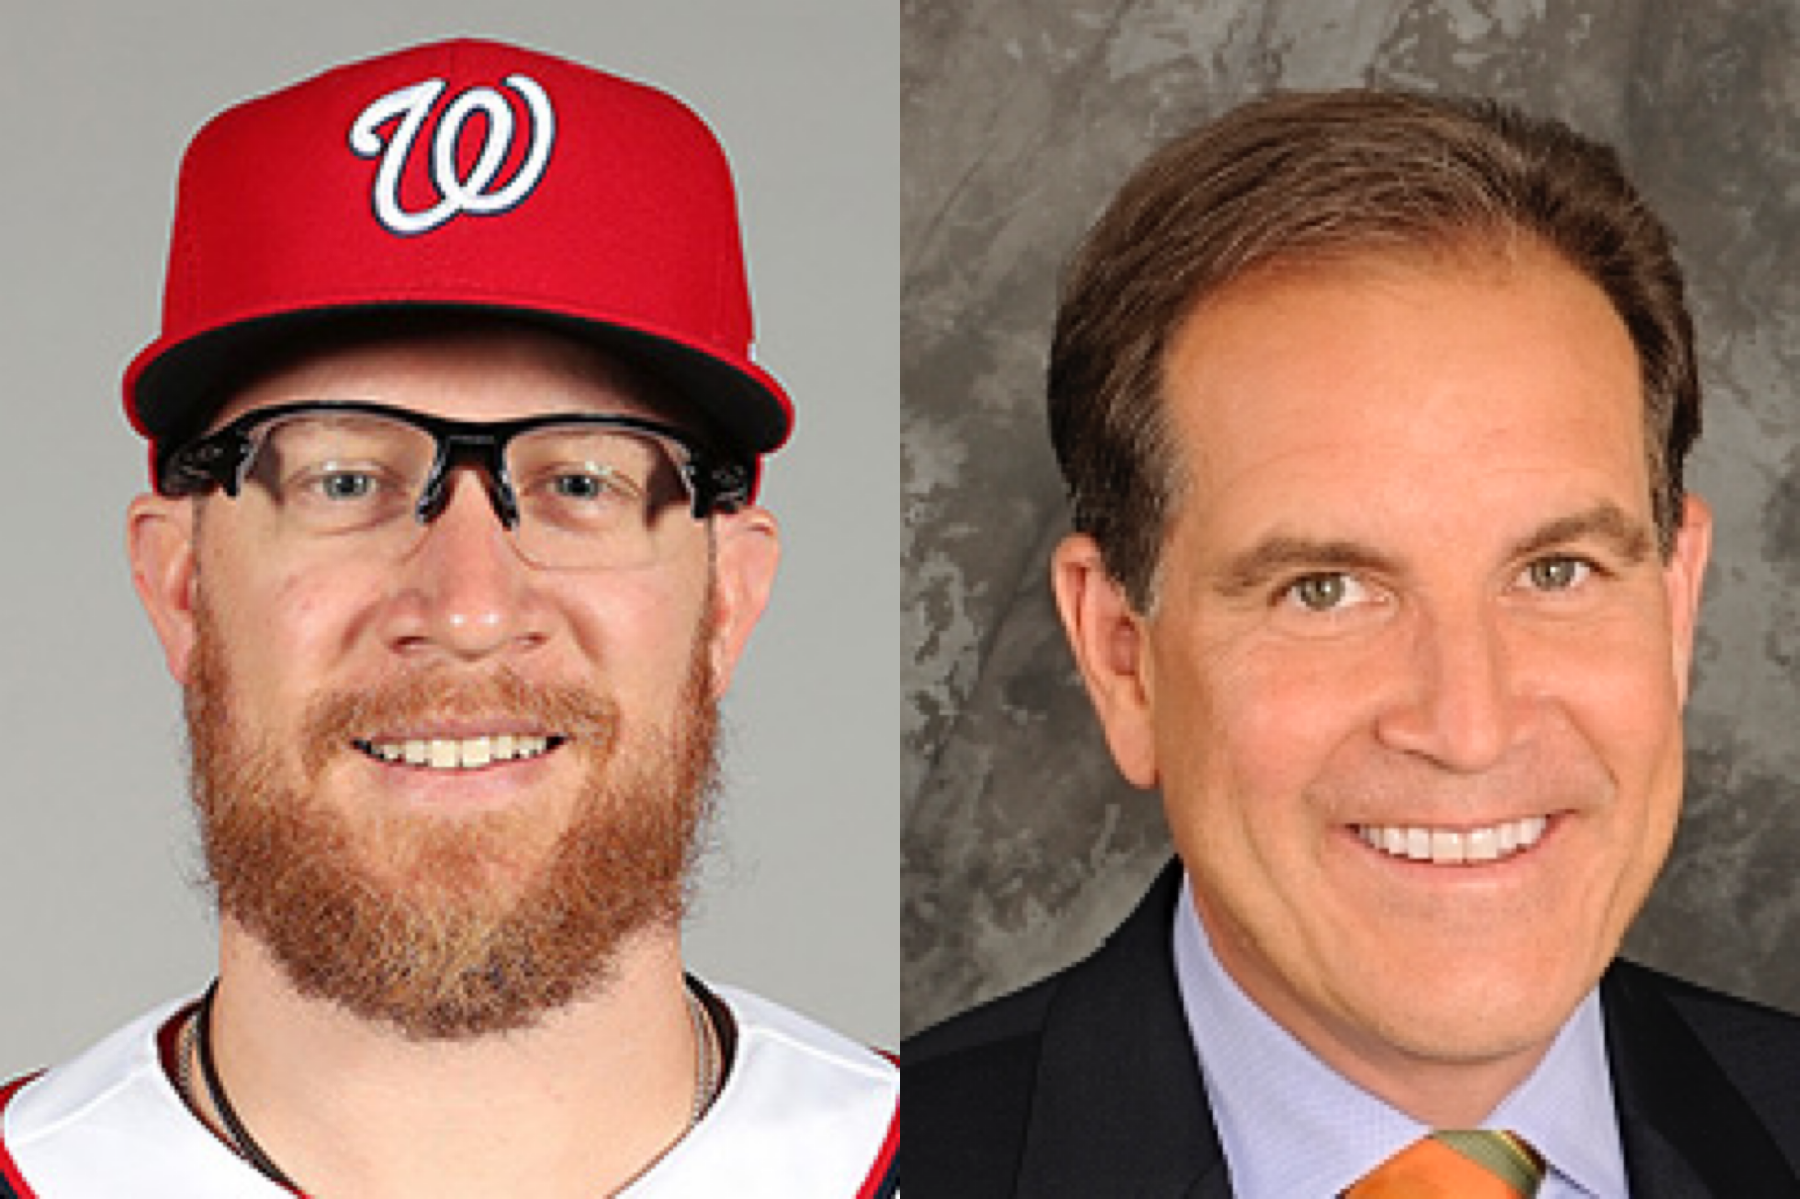 What to do with Doo? Washington Nationals' closer Sean Doolittle